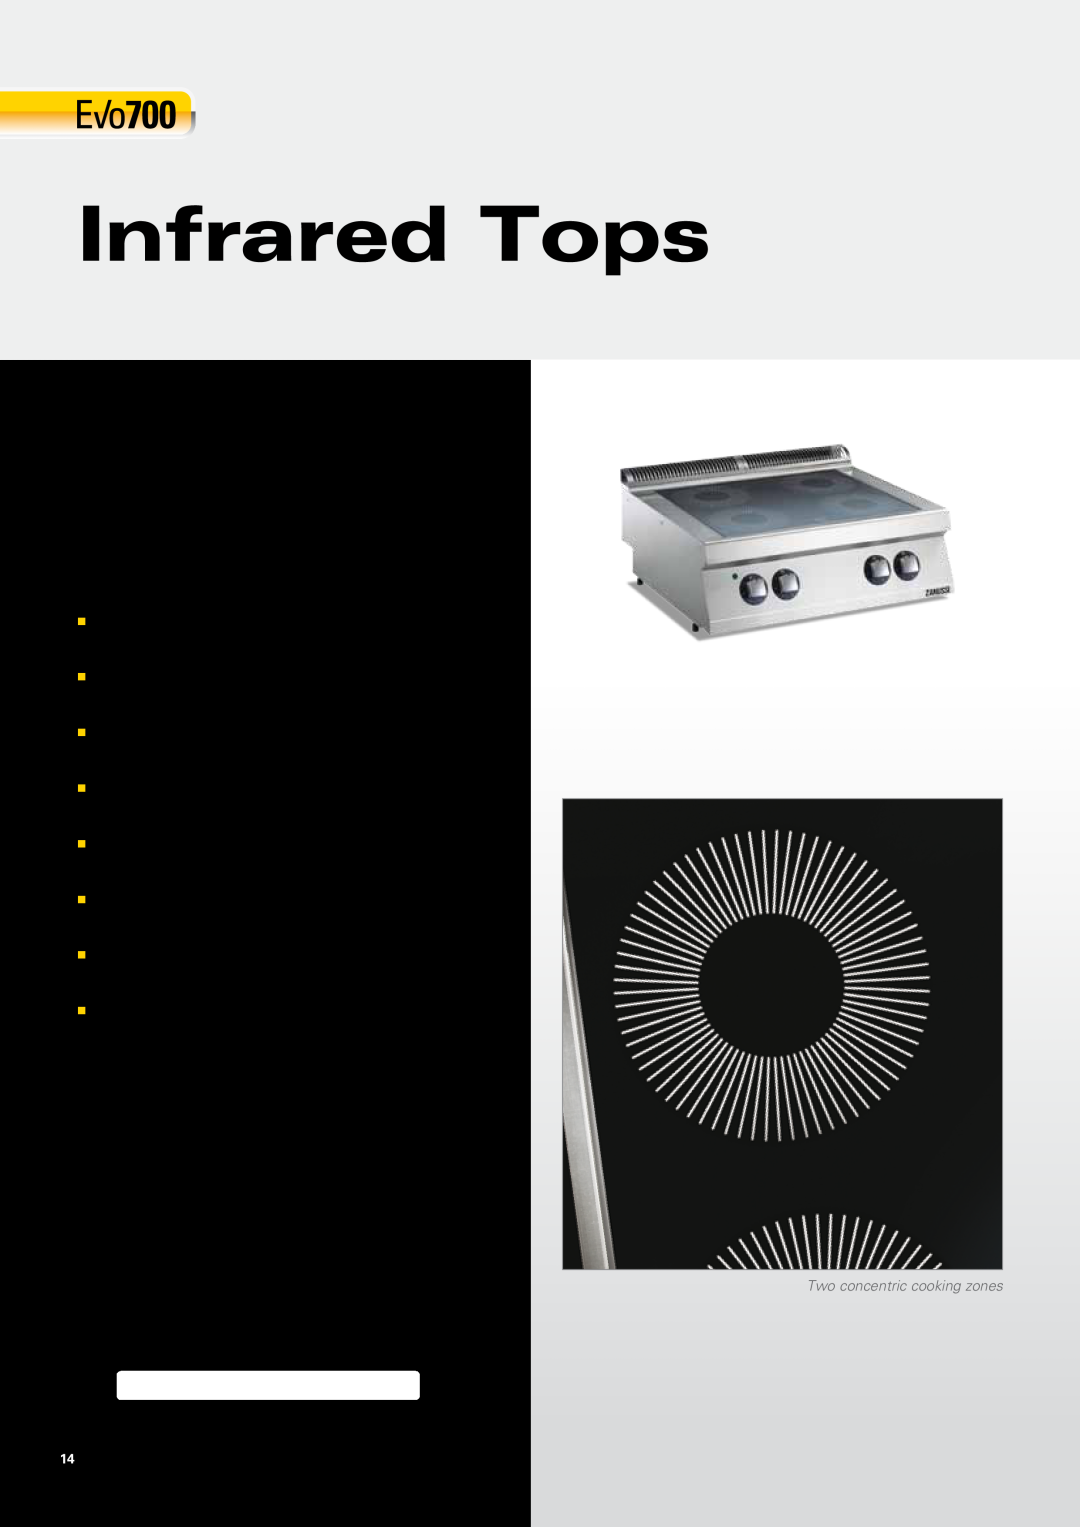 Zanussi EVO700 manual Infrared Tops, Two concentric cooking zones 